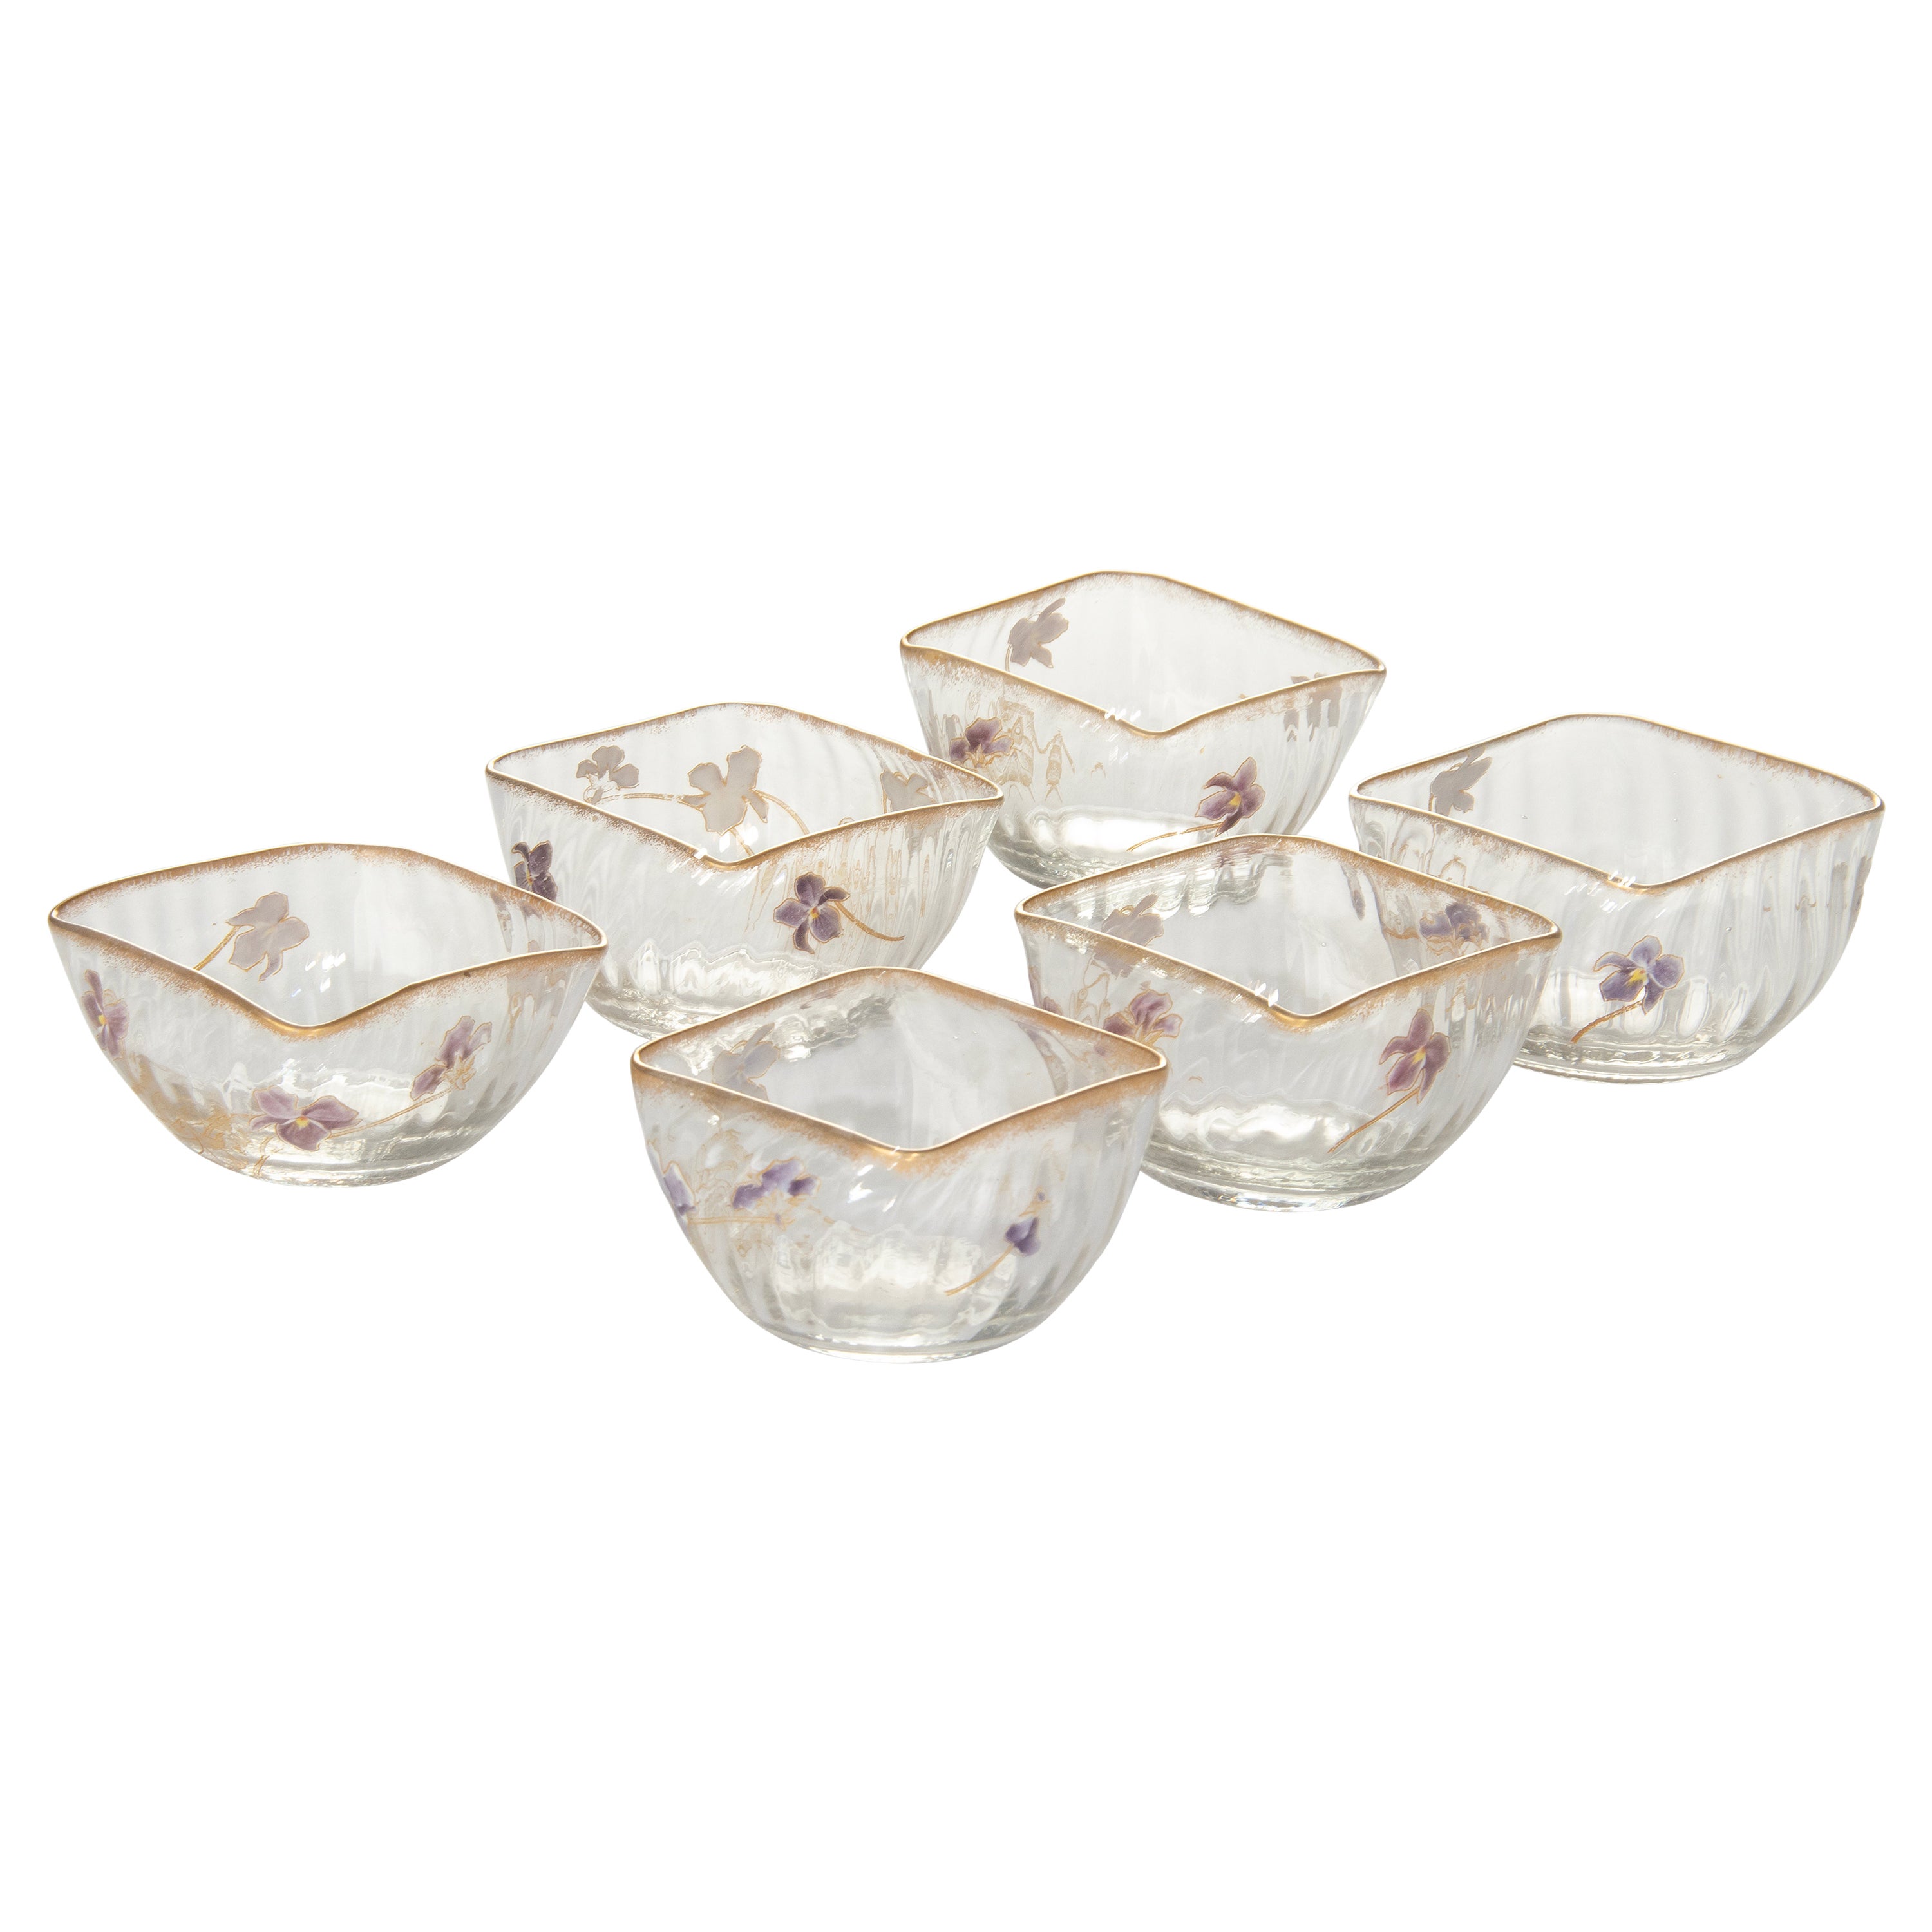 Set of 6 Crystal Art Nouveau Bowls Hand Painted with Flowers Attr. to Daum Nancy For Sale